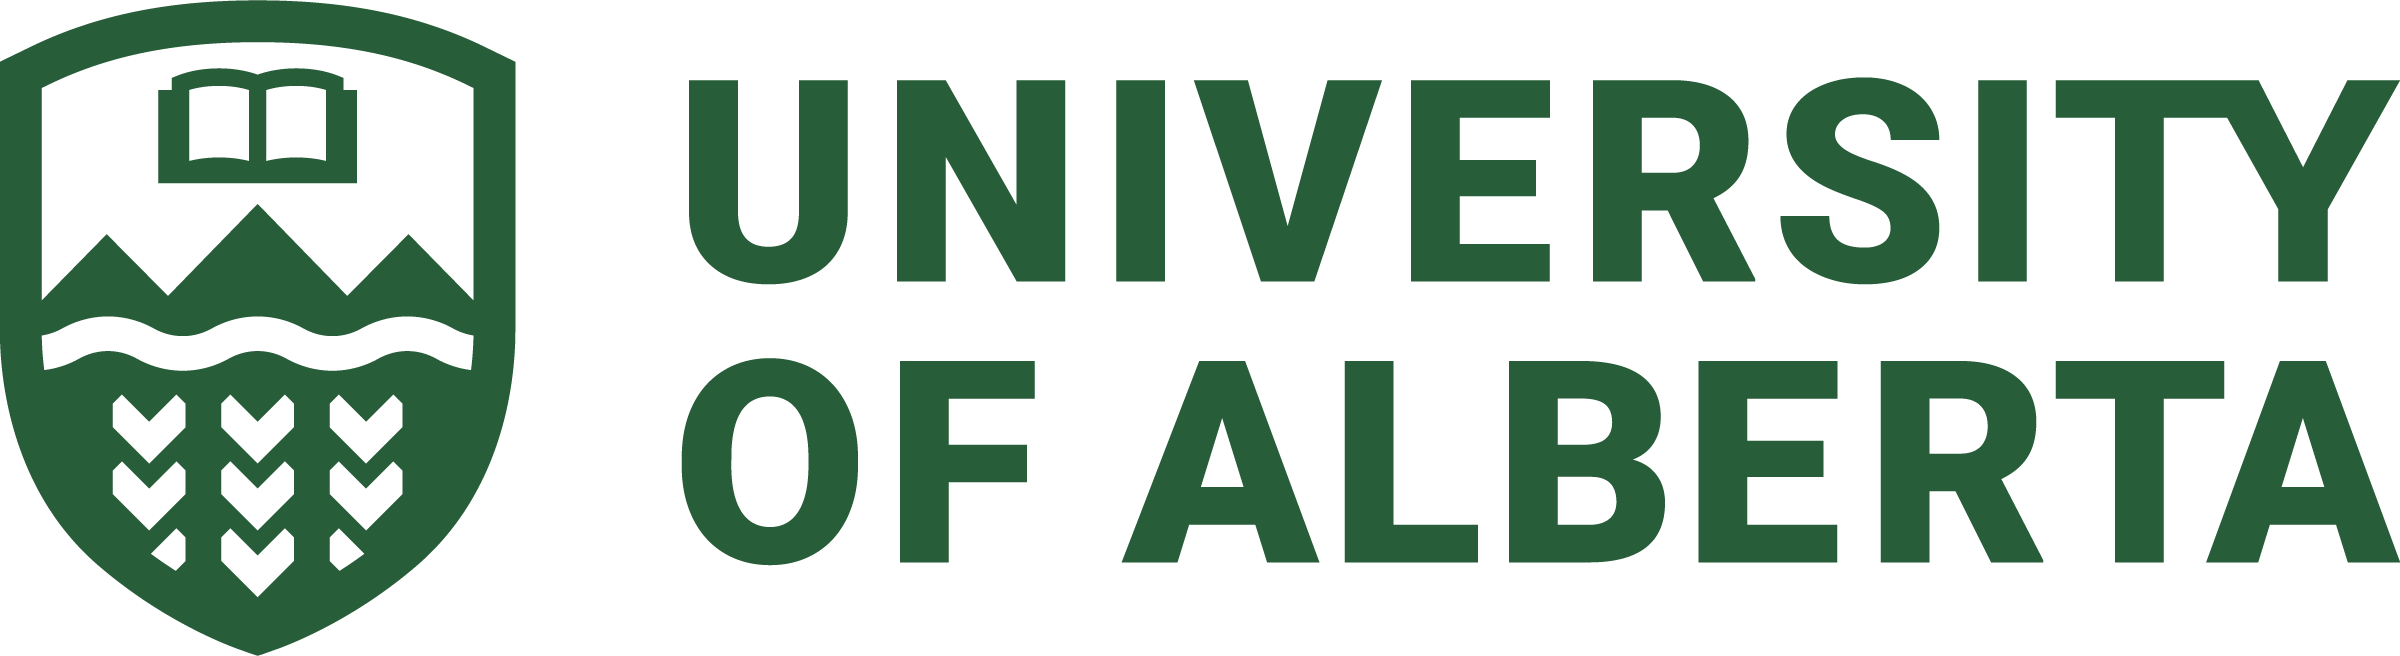 "University of Alberta" in green text with a green shield to the left